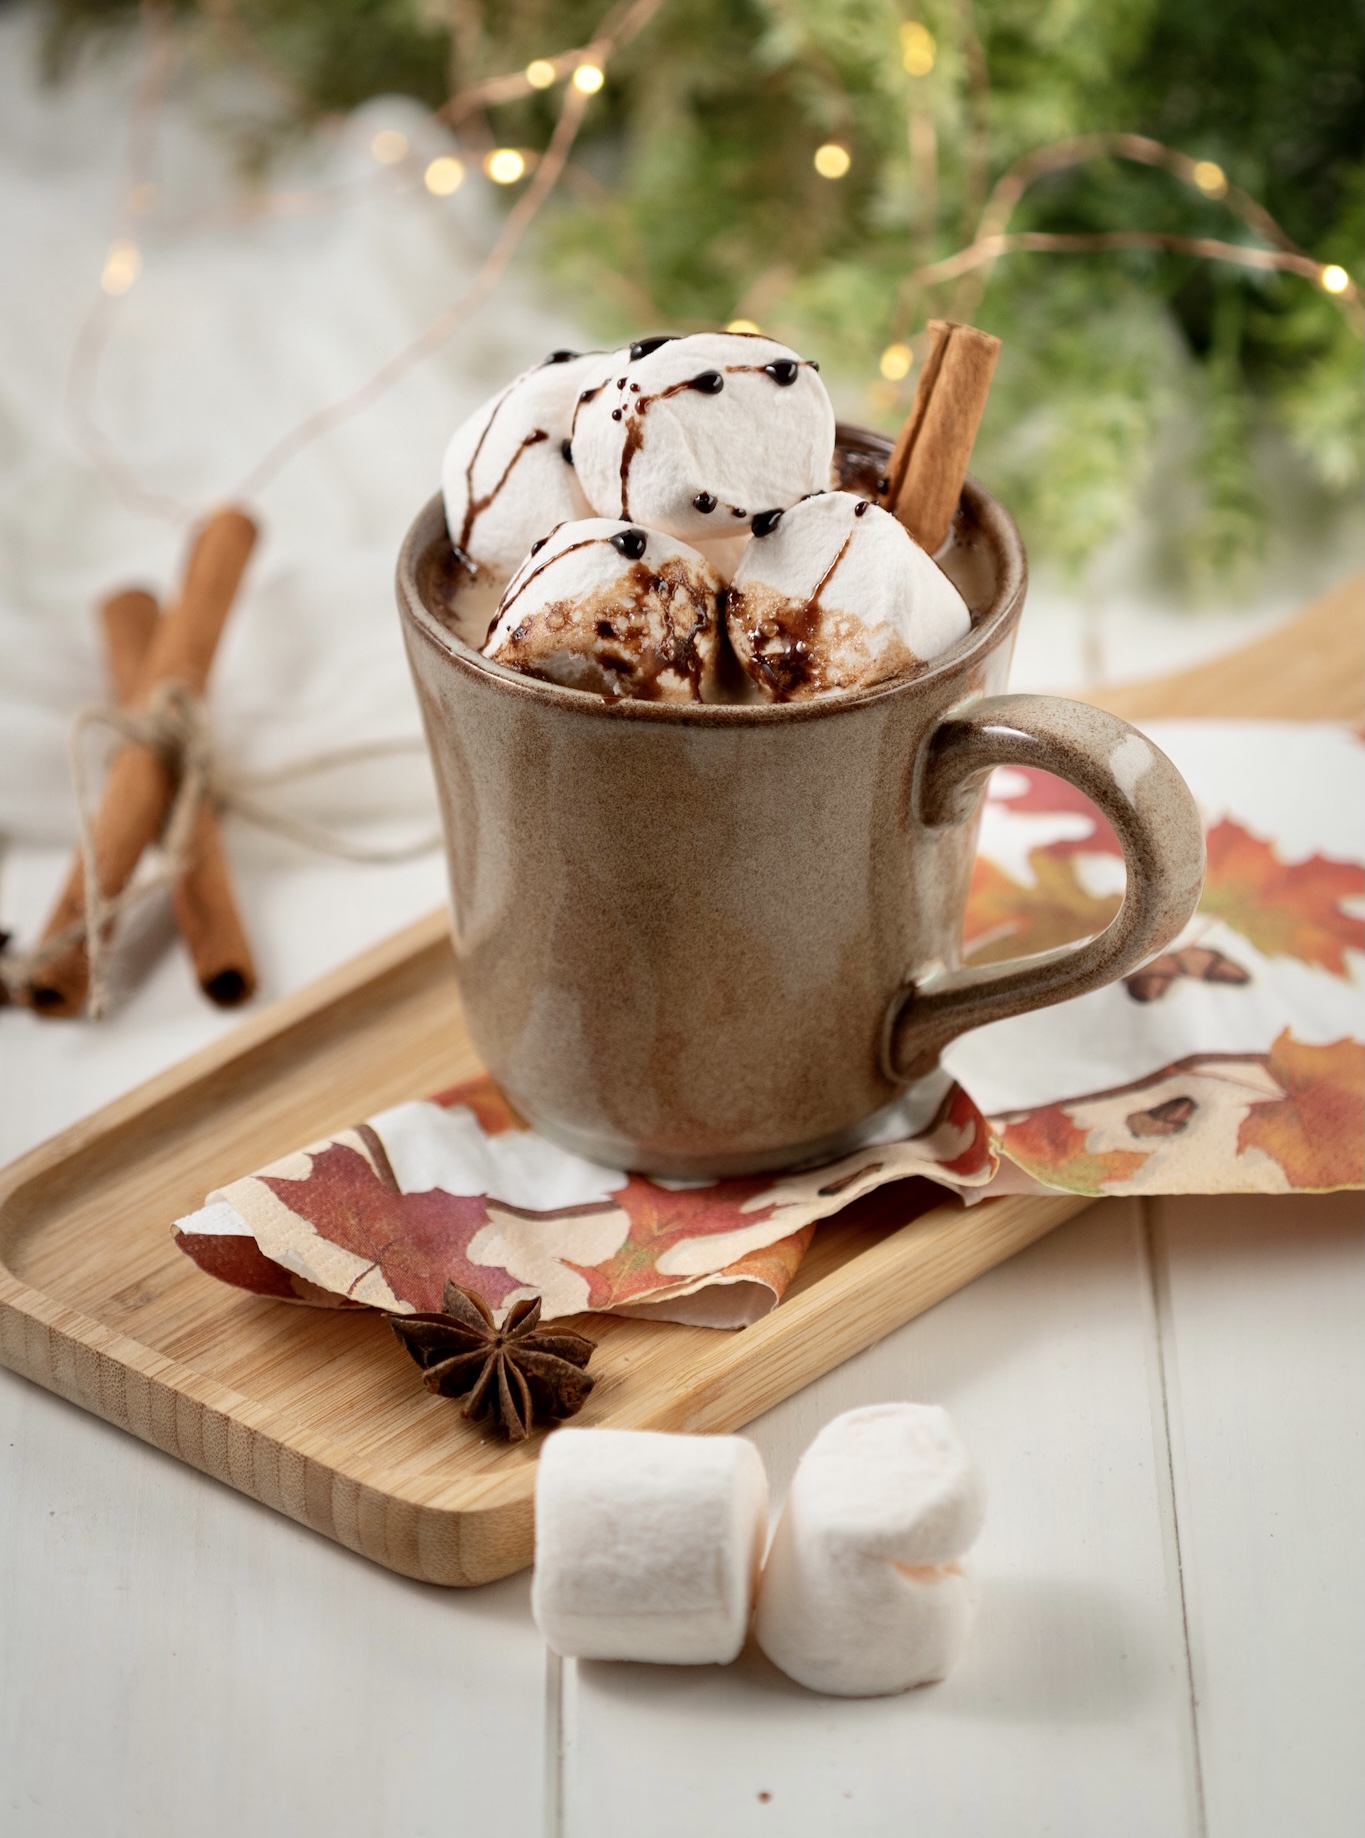 Spiced Mexican Hot Chocolate